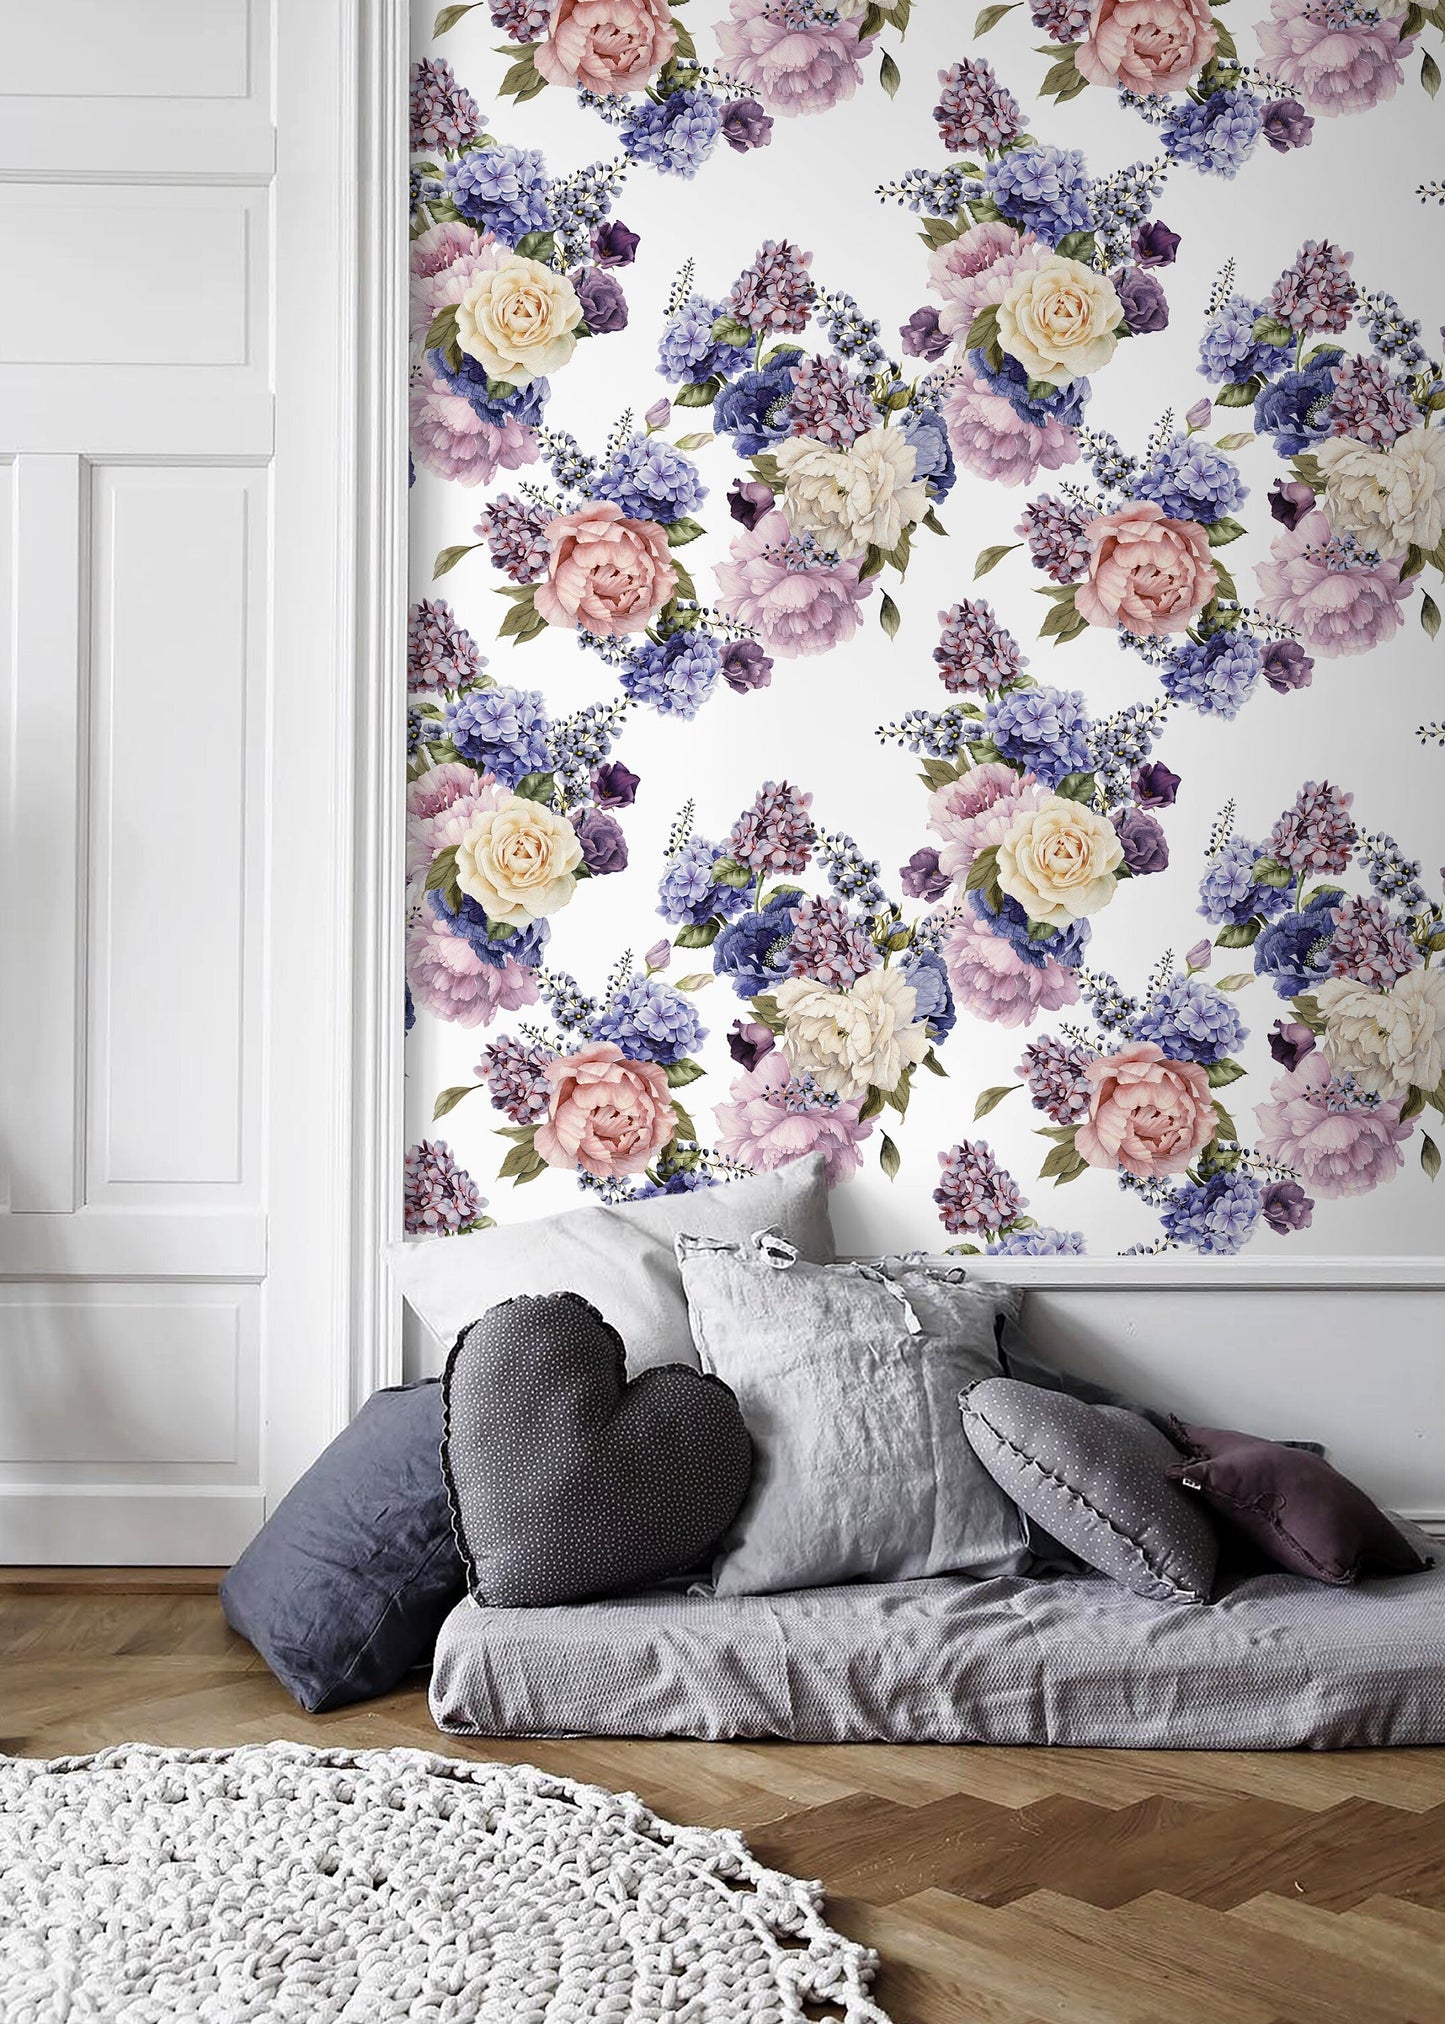 Floral Roses and Hydrangeas / Wallpaper Peel and Stick Wallpaper Removable Wallpaper Home Decor Wall Art Wall Decor Room Decor - C795